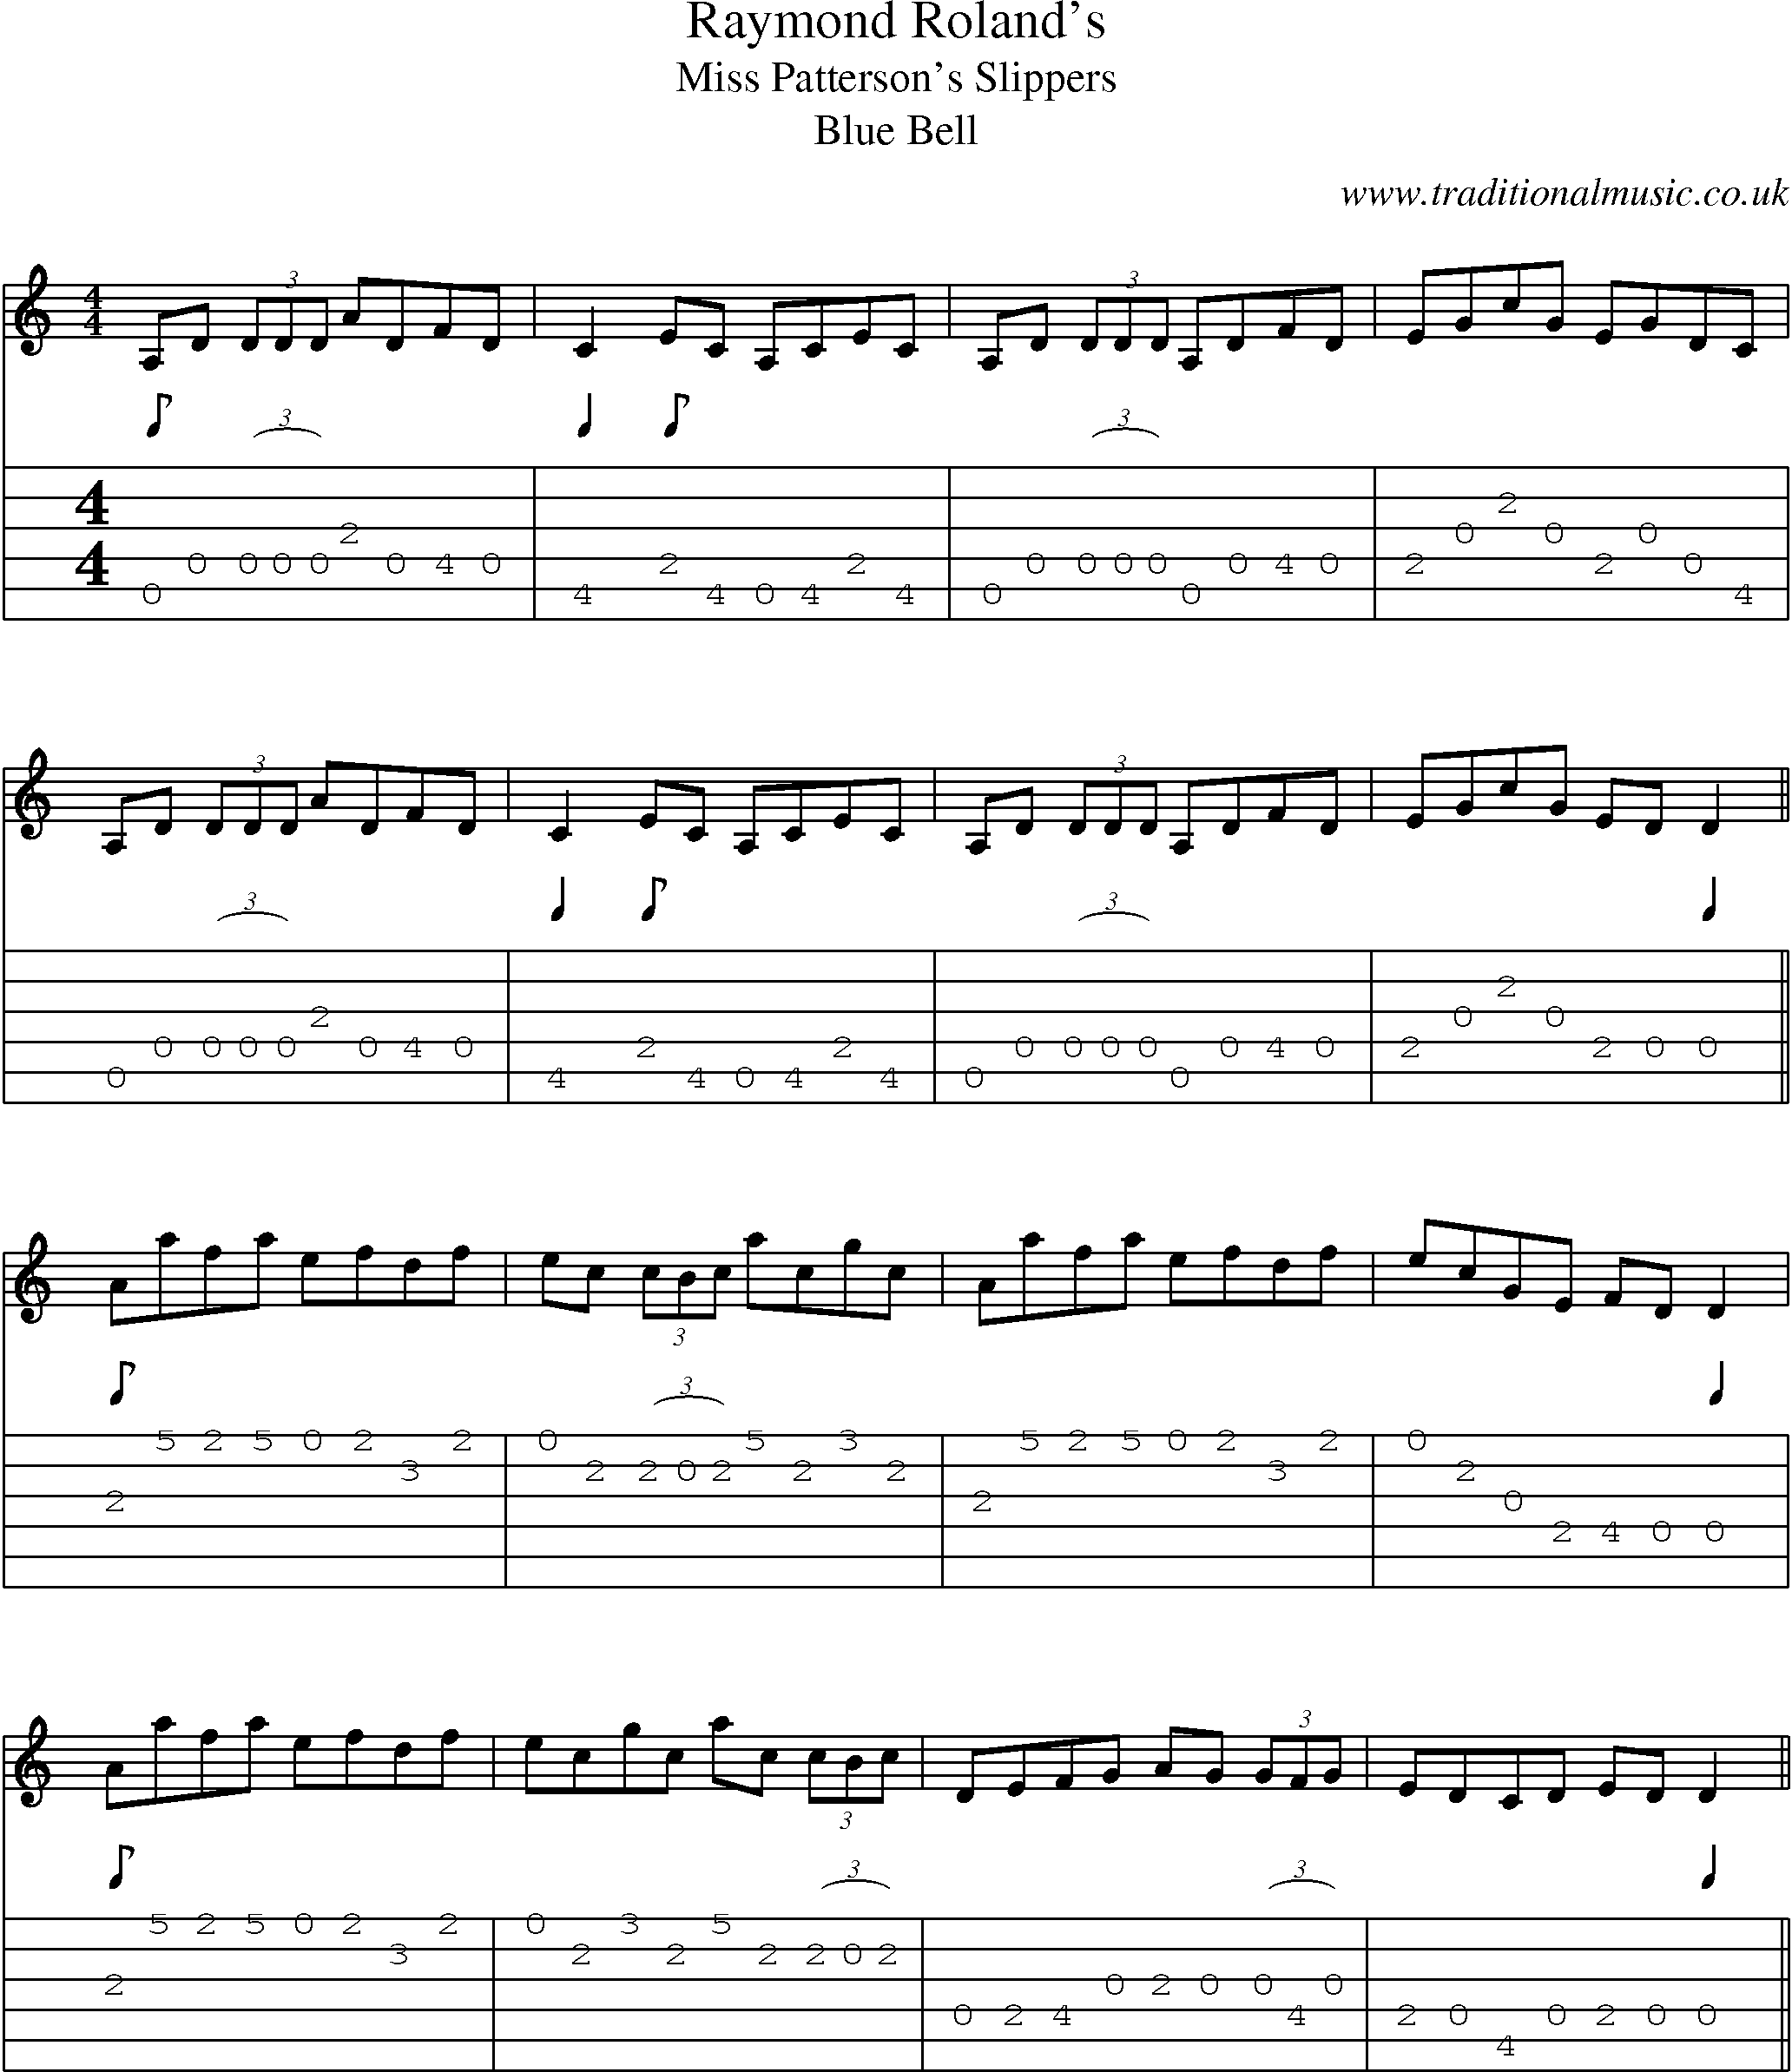 Music Score and Guitar Tabs for Raymond Rolands